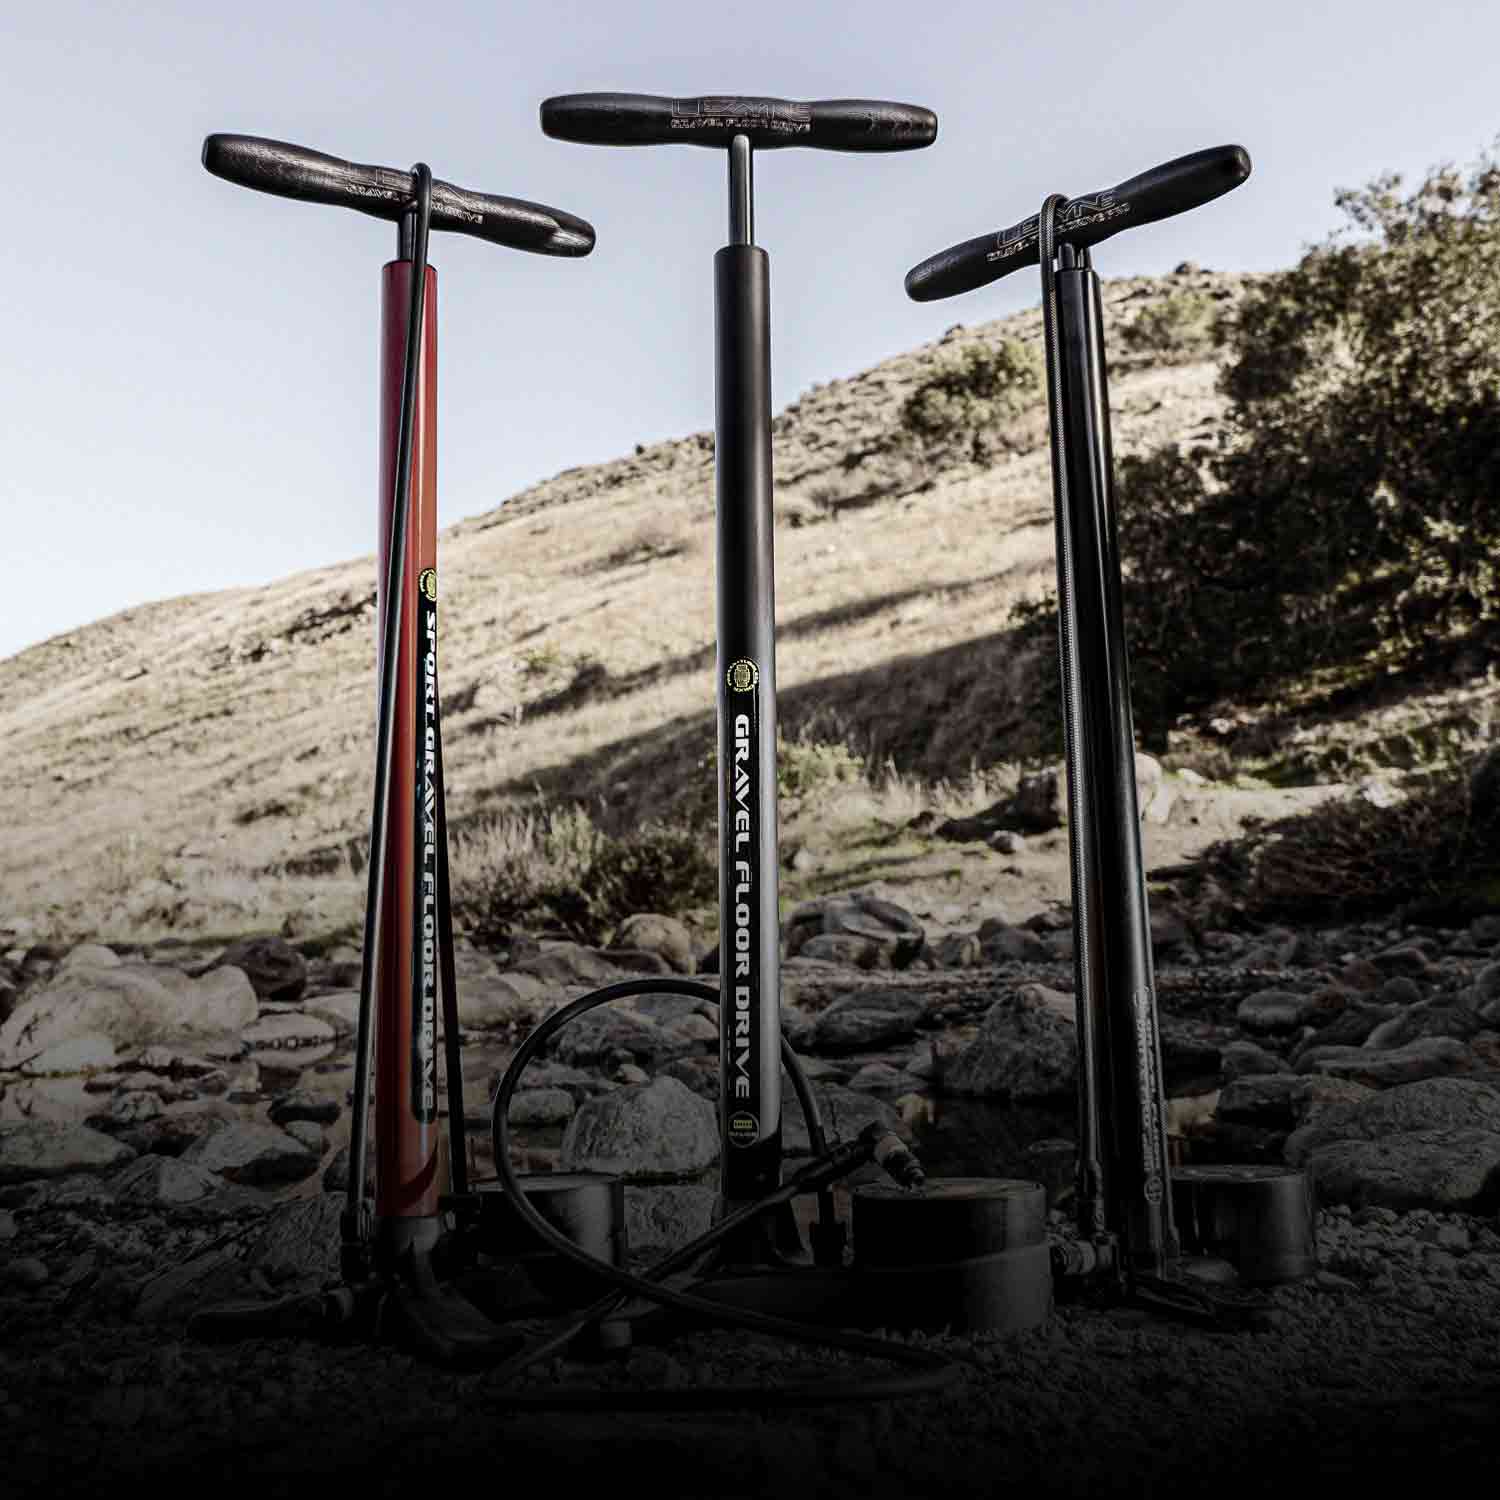 3 Floor pumps on a rocky hillside with the words Gravel Floor Drive printed on one of them.